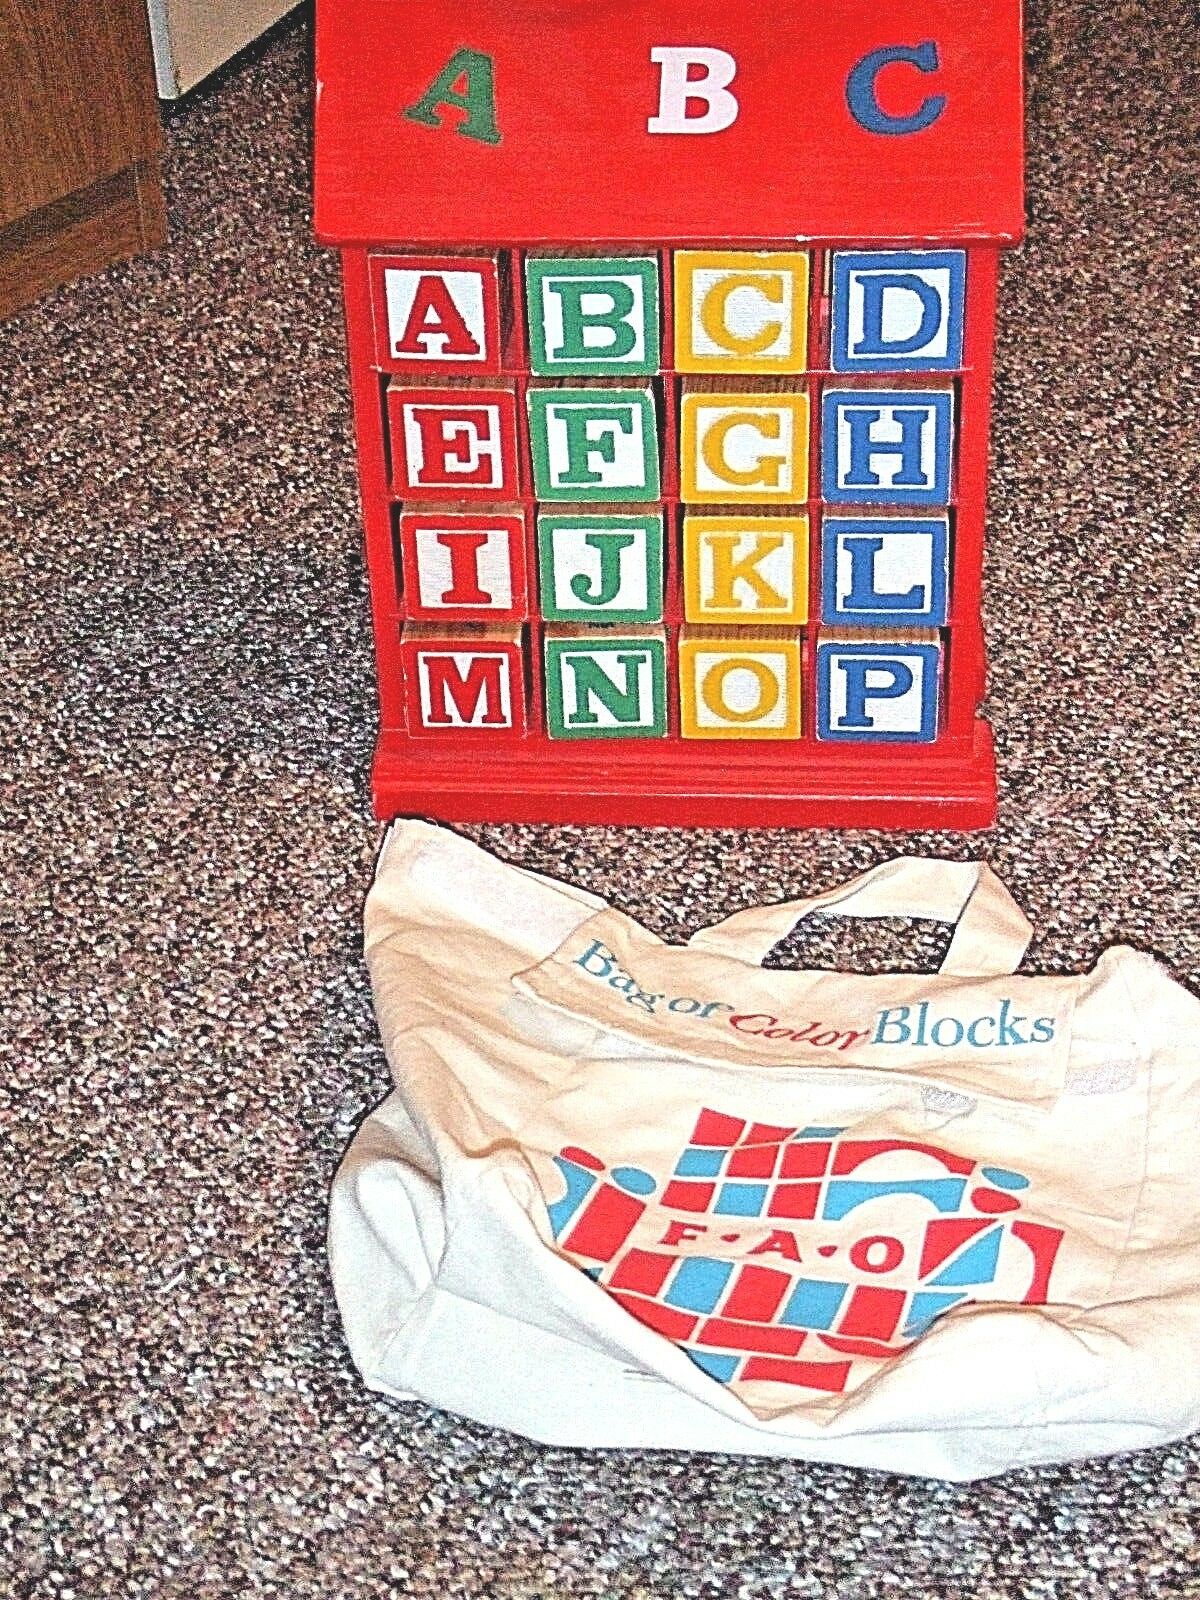 Bag Of 32 Color Blocks With Stand For Toddlers Teaching Learning Fun